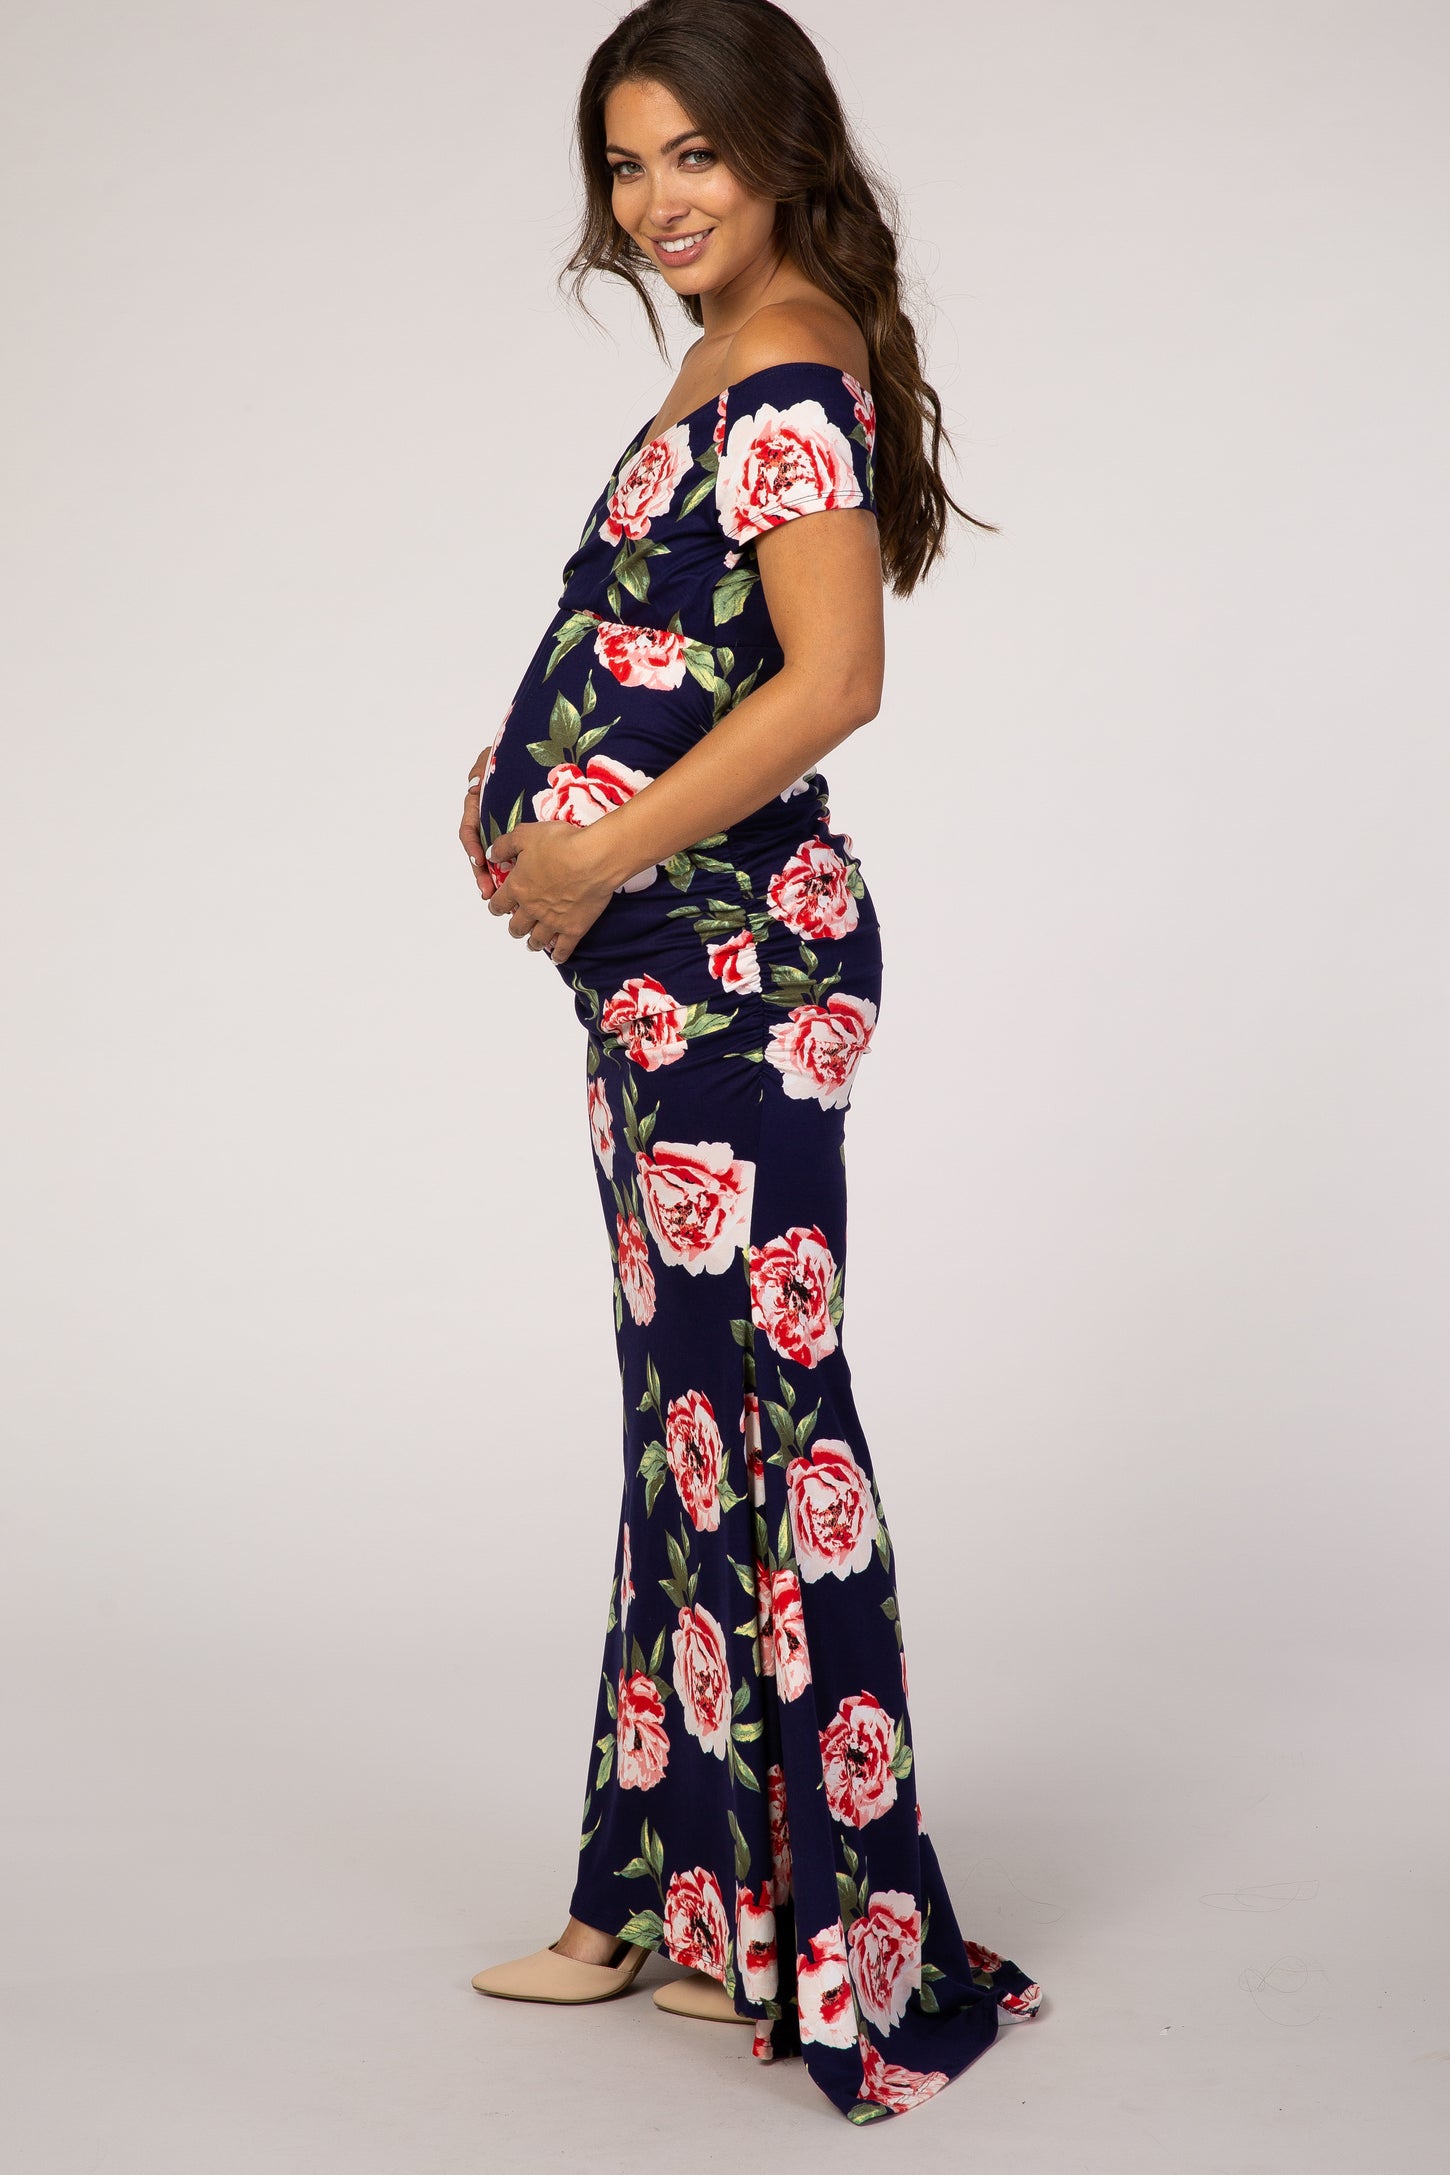 PinkBlush Navy Floral Off Shoulder Wrap Maternity Photoshoot Gown/Dress